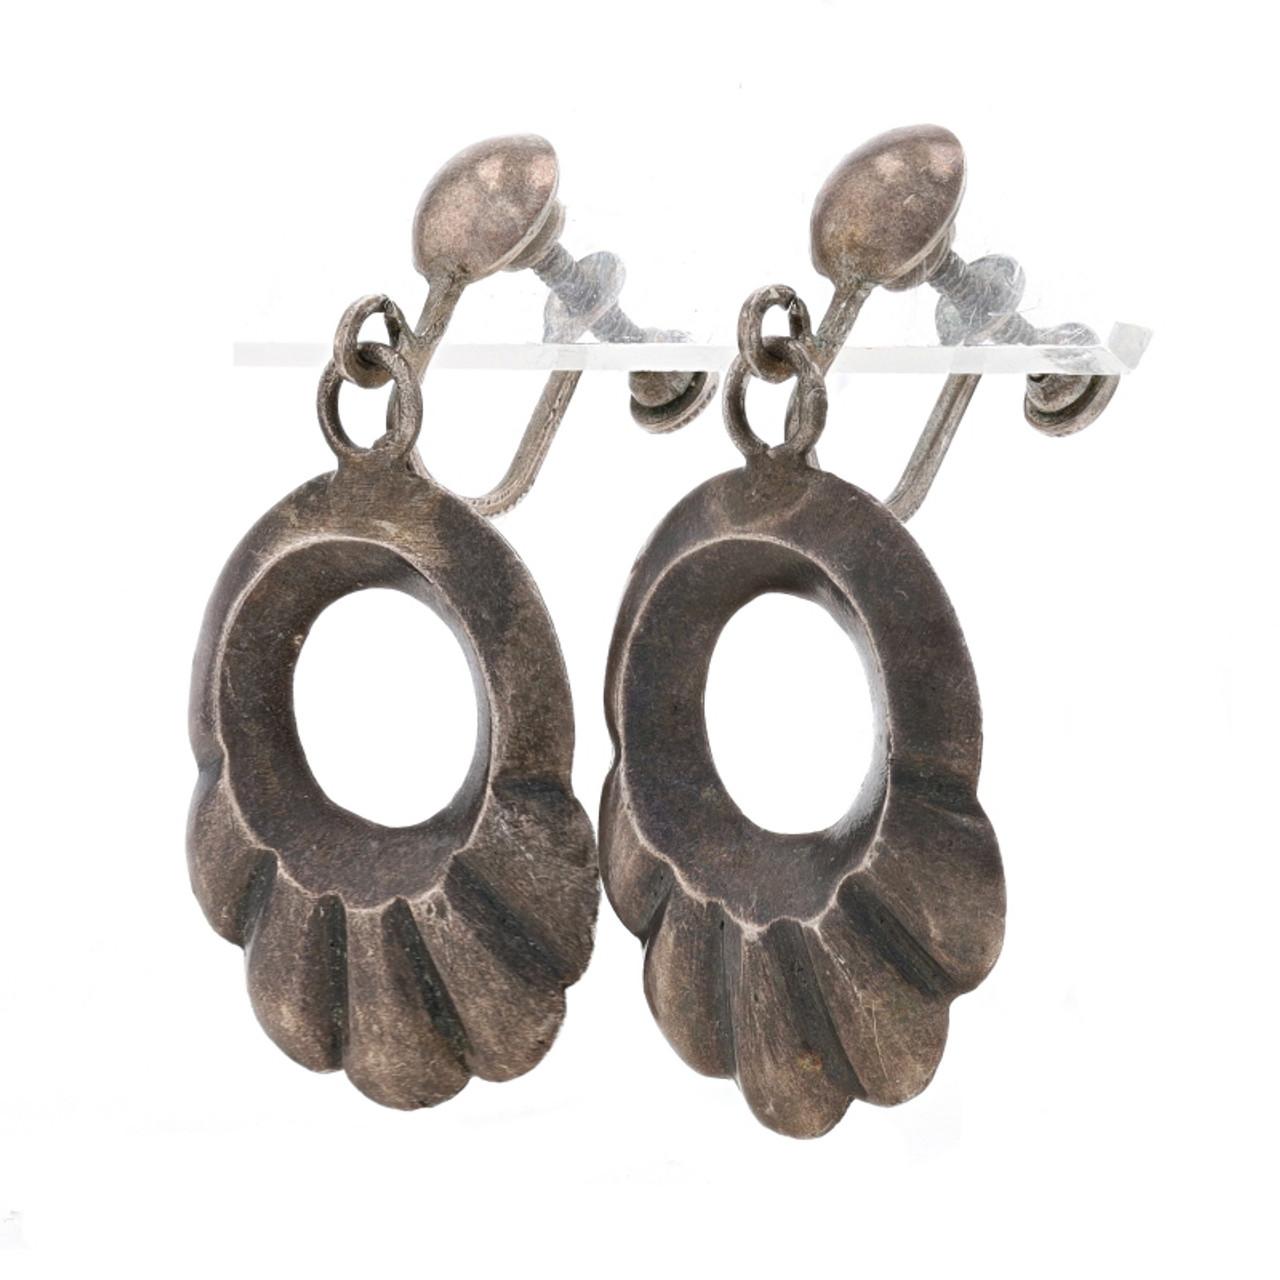 Native American Dangle Earrings Sterling Silver 925 Scallop Hoop Non-Pierced

Additional information:
Material: Metal Sterling Silver
Native American
Style: Dangle
Fastening Type: Non-Pierced Screw-On Closures
Theme: Scallop
Dimensions:
Tall: 1